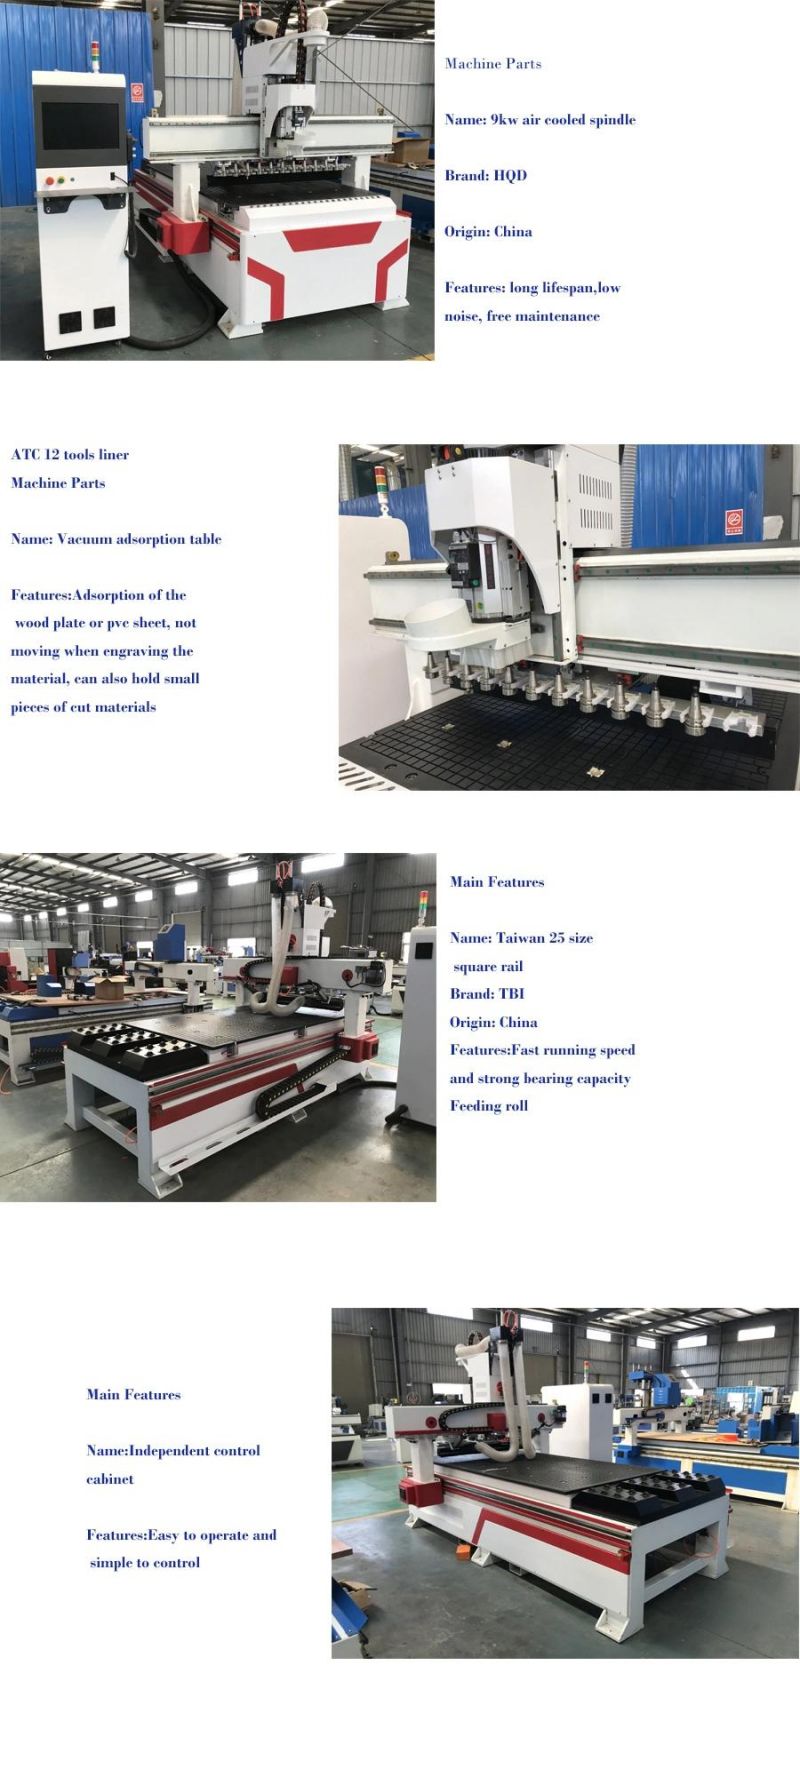 Liner Tool Changer CNC Engrever / Wood Atc CNC Router for Wood Furniture